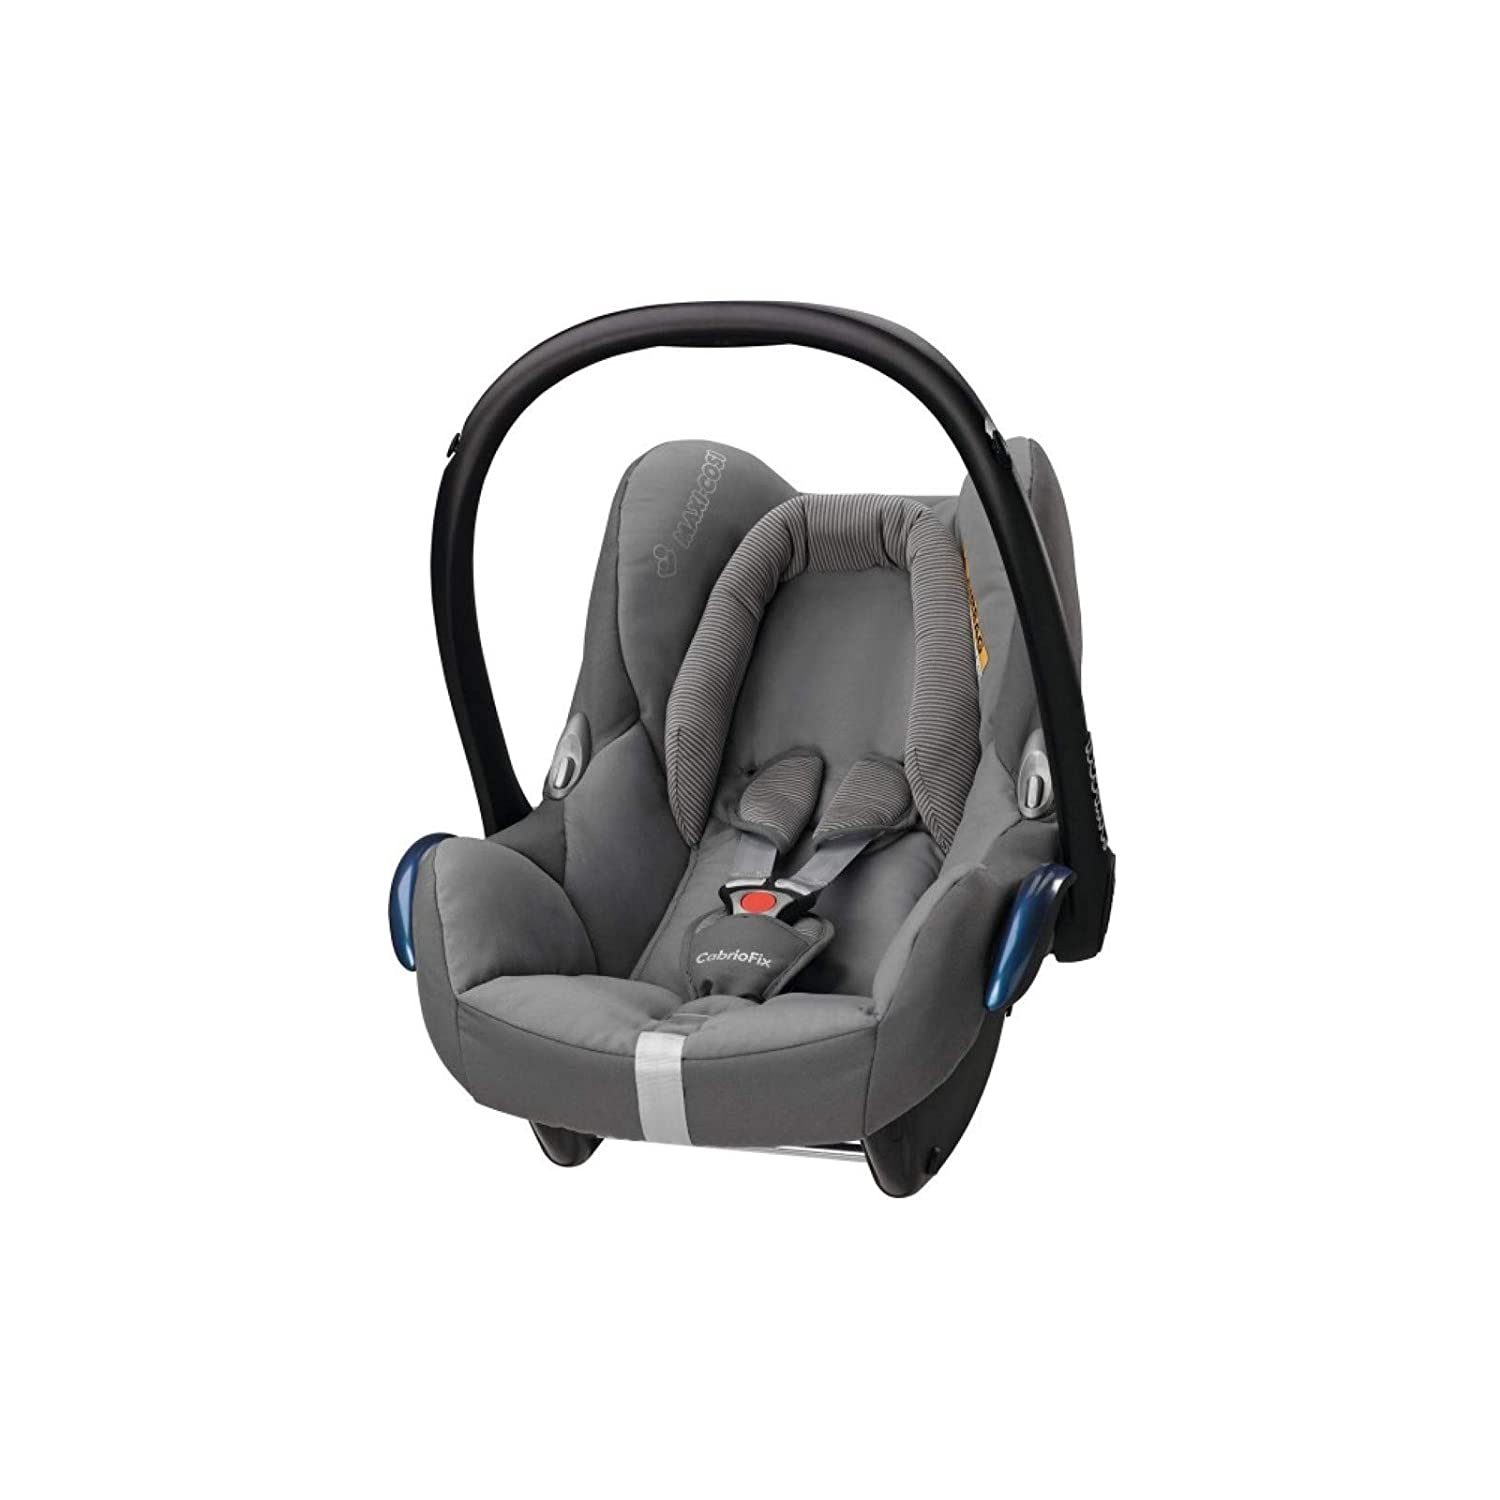 Maxi-Cosi CabrioFix Group 0 + (0-13 kg) Baby Car Seat with Isofix Station, Collection 2018 without Isofix mount concrete grey